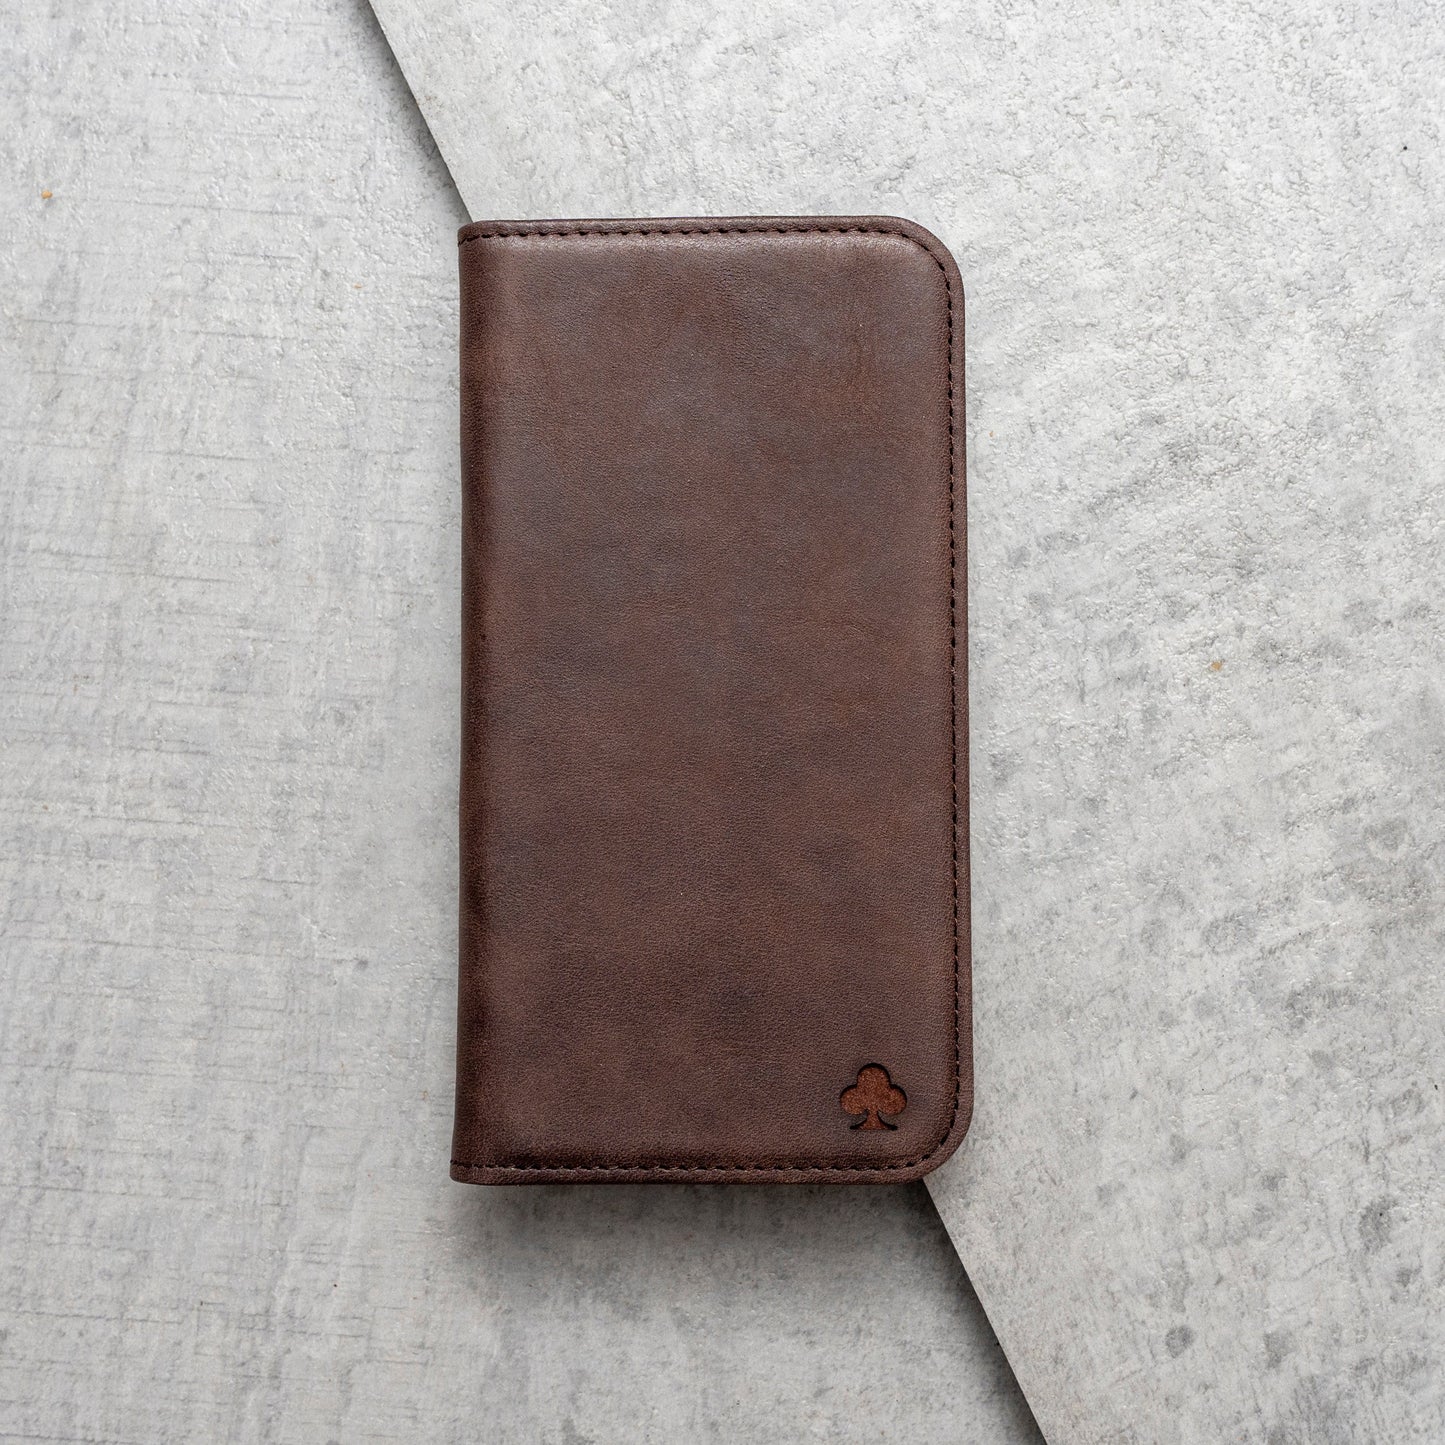 Samsung Galaxy S10 Plus Leather Case. Premium Slim Genuine Leather Stand Case/Cover/Wallet (Chocolate Brown)